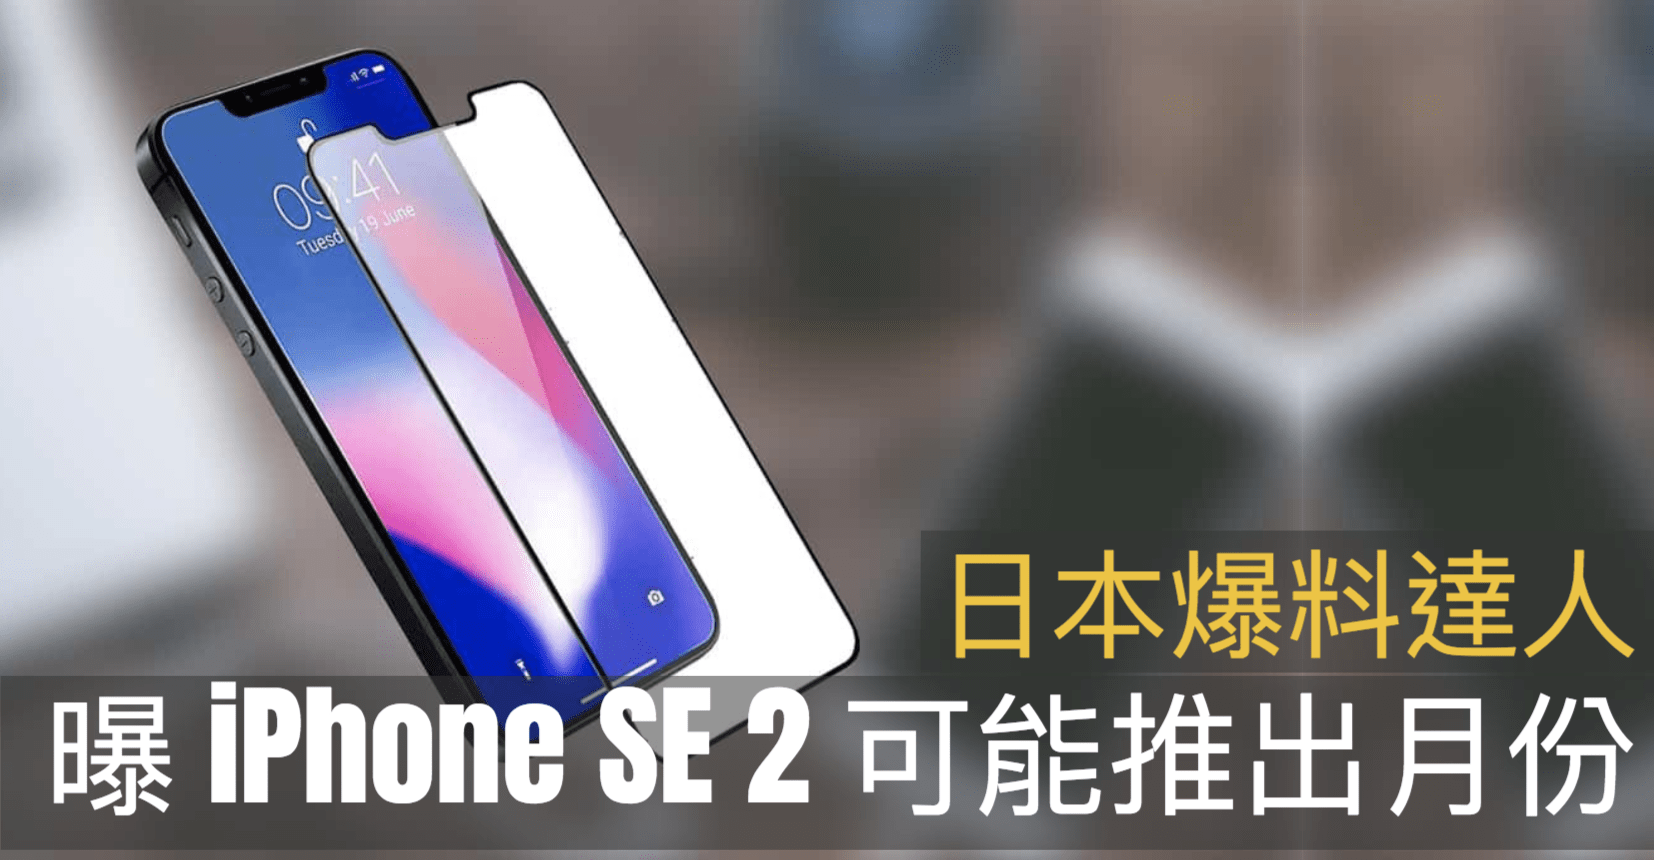 japan leaker said iphone se 2 may be sold in sept 00a